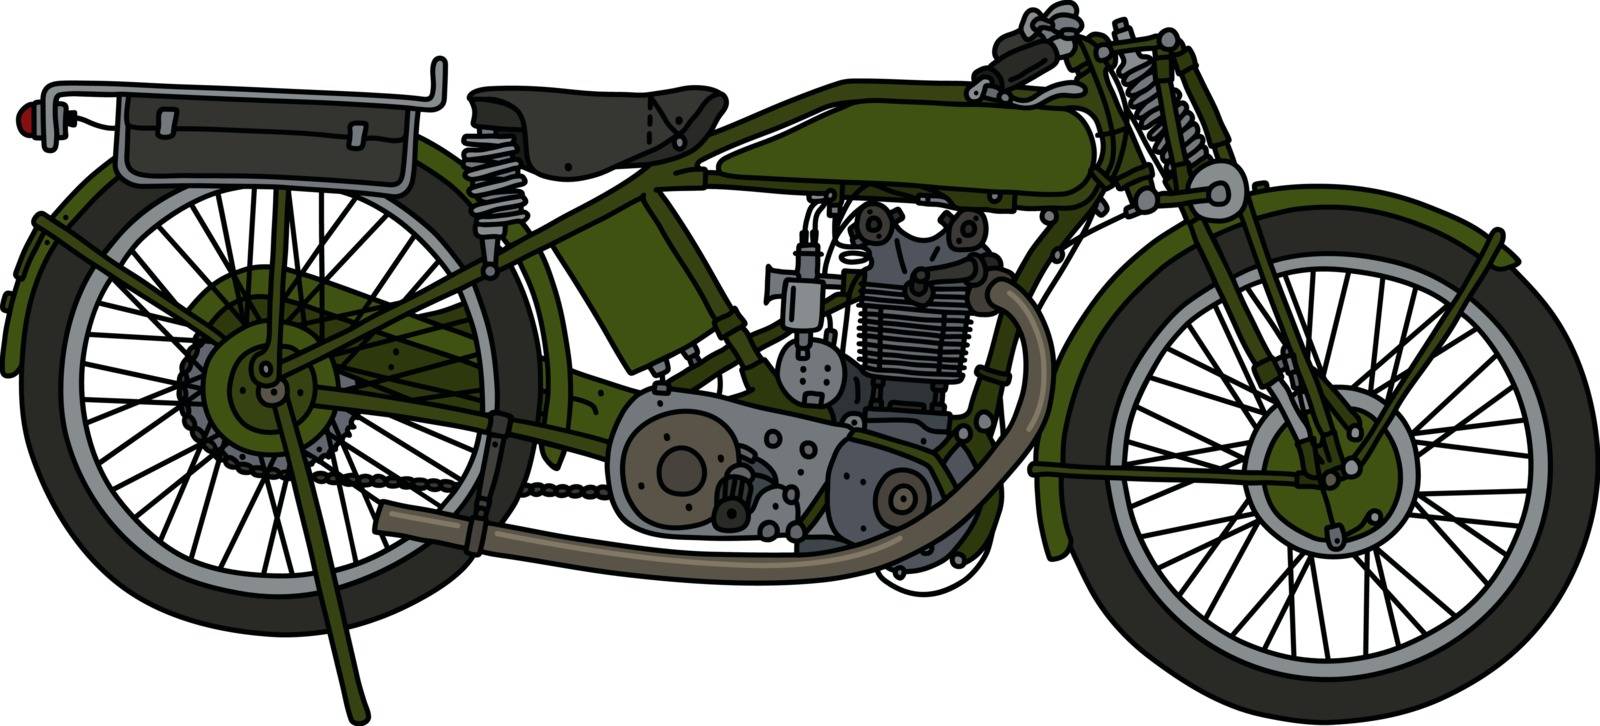 The classic green motorcycle by vostal